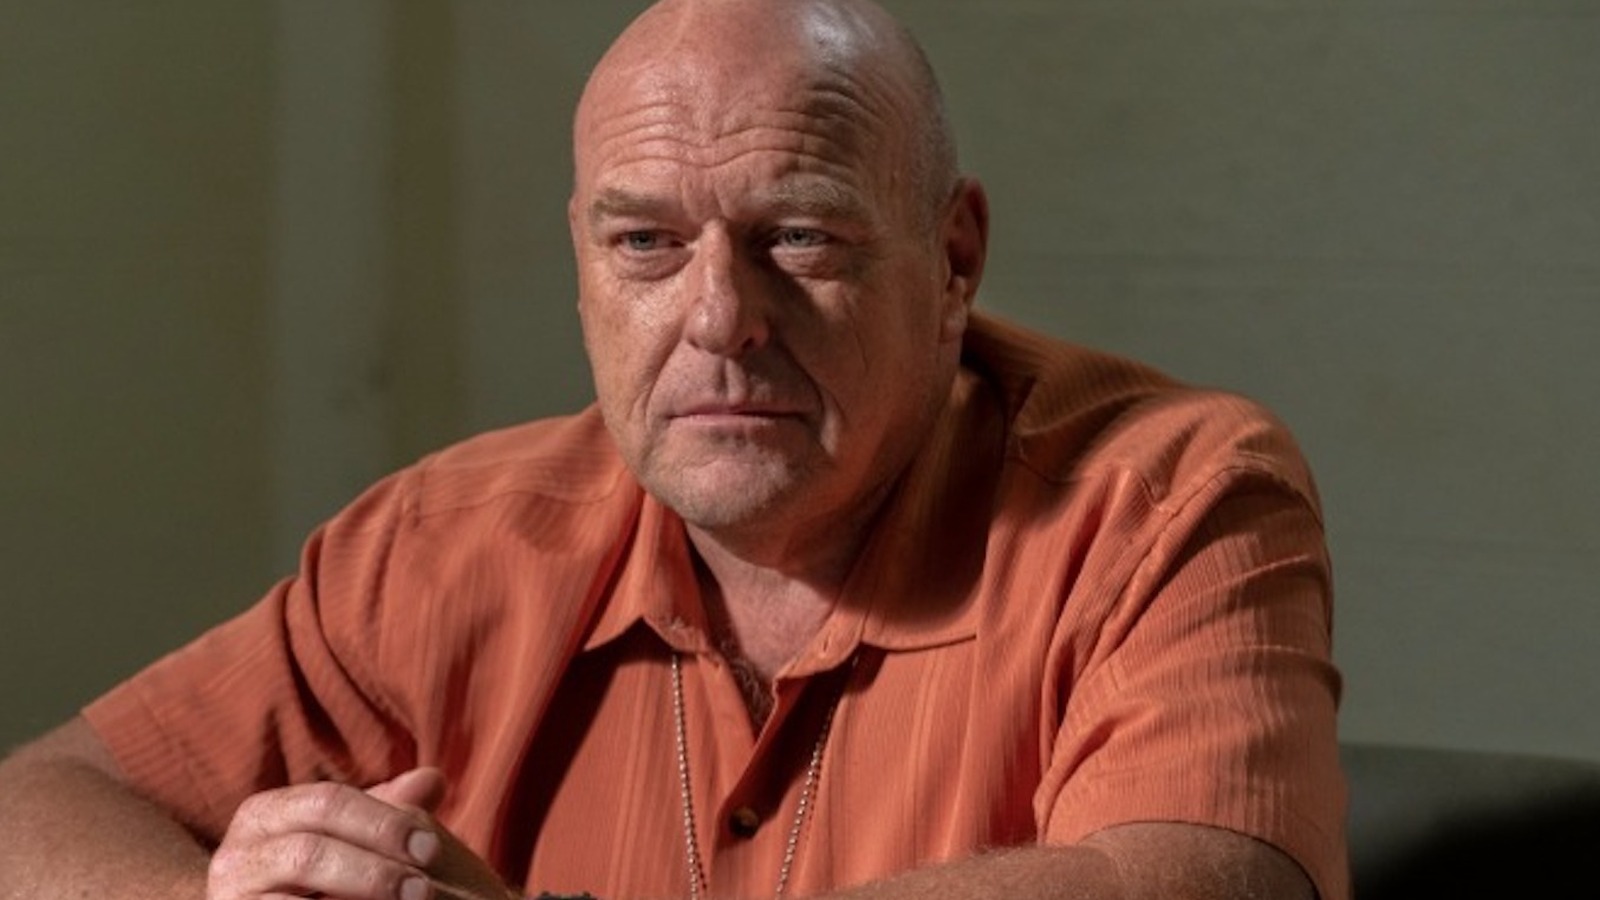 Breaking Bad's Dean Norris nearly found himself on Wall Street